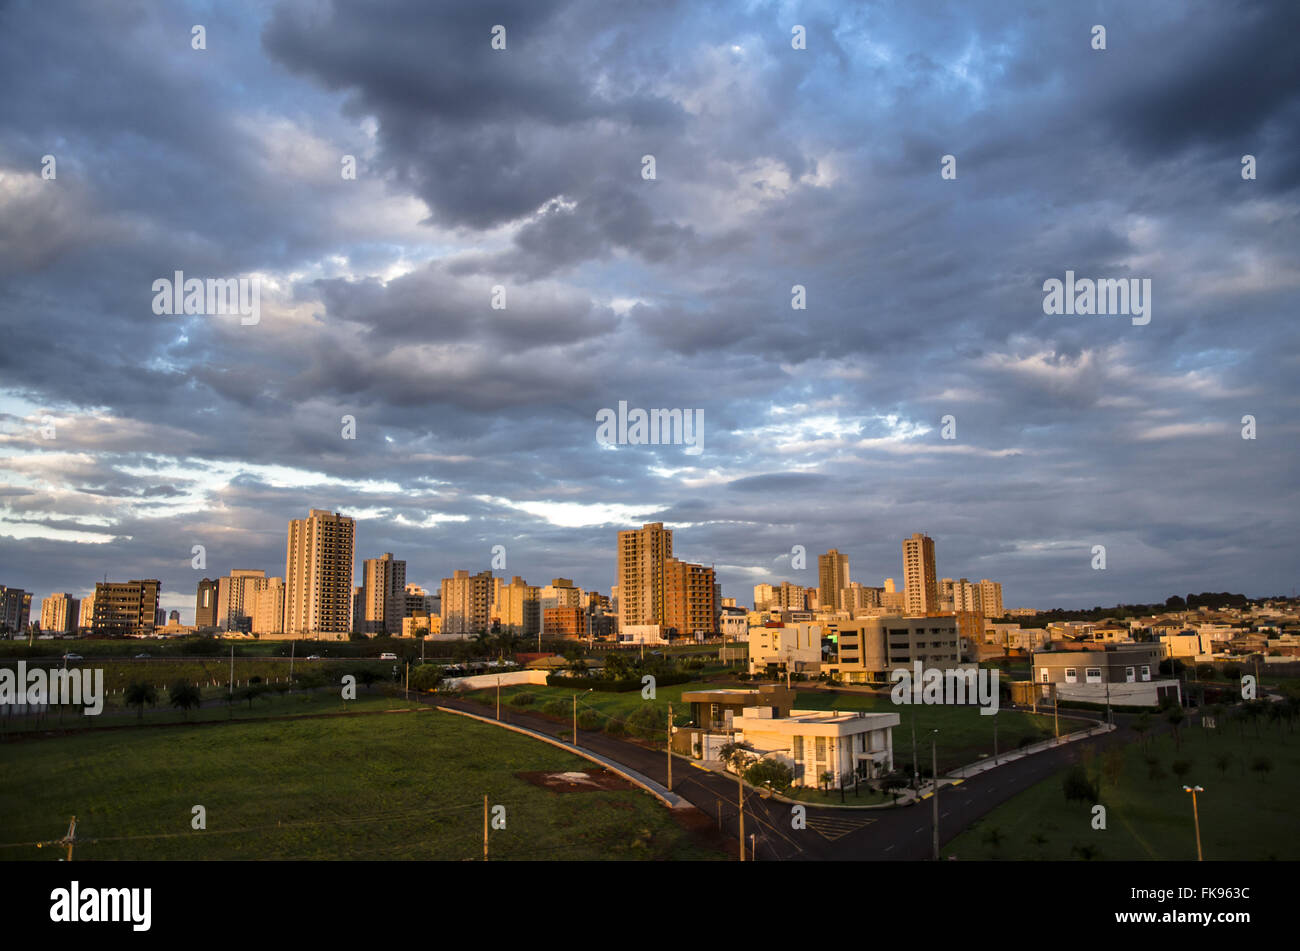 Temporal rainfall over buildings of the city in the afternoon Stock Photo